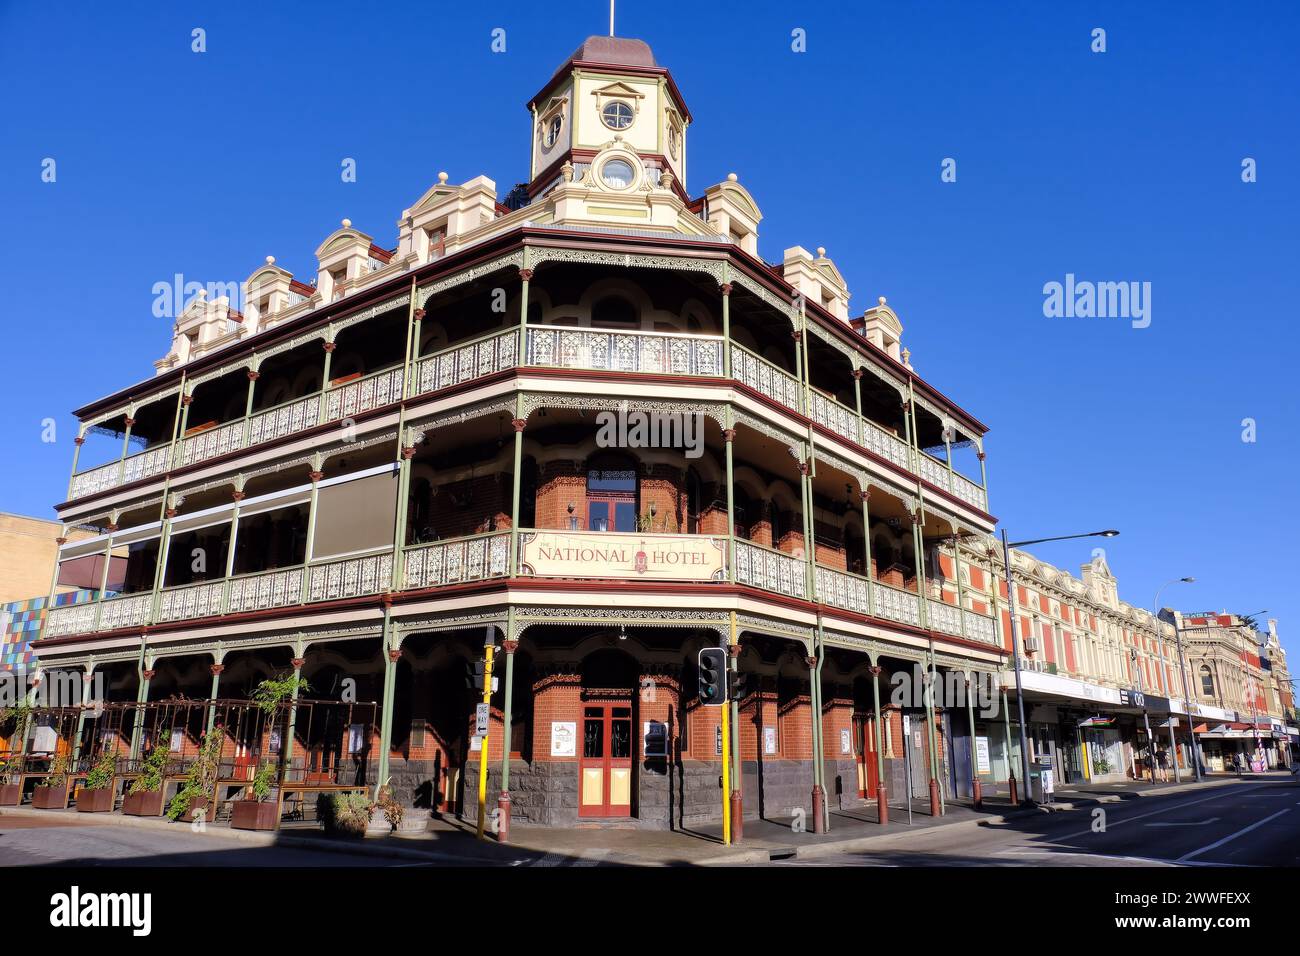 Historic National Hotel in High Street and Market Street, Fremantle, Perth, Western Australia Stock Photo